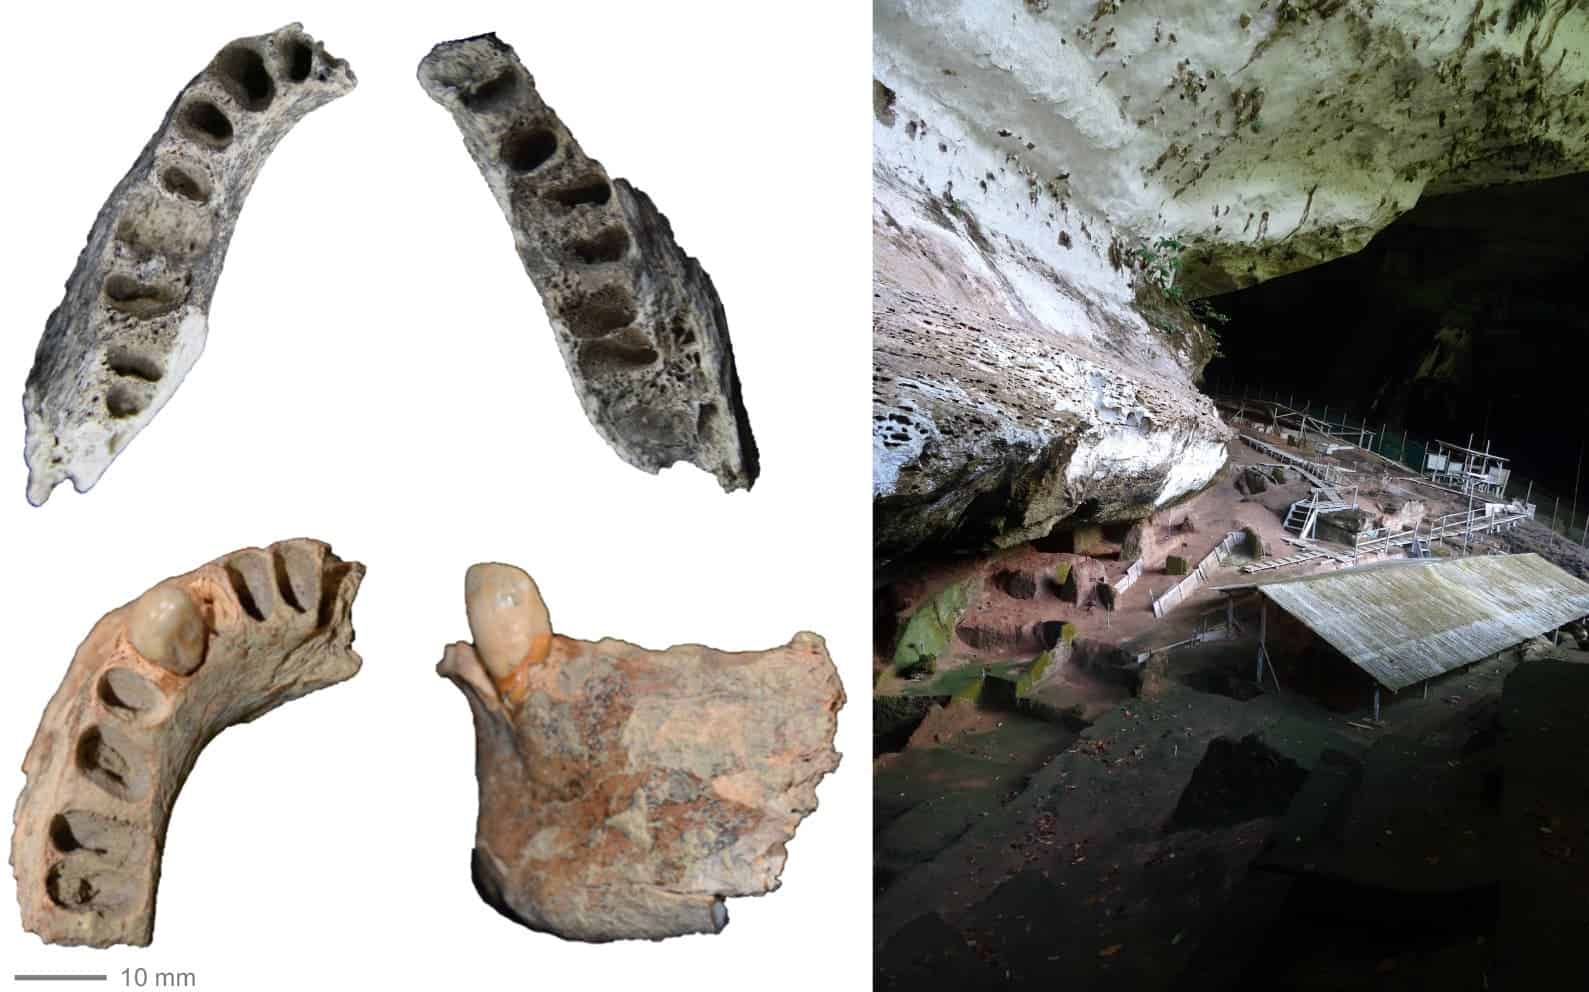 Two human jaws from Niah Caves in Borneo found in 1958 but only just revealed. Top jaw is 30,000 years old, bottom jaw 11,000 years old; left image is Niah Caves archaeological site where they were both found. Image credits: Darren Curnoe.